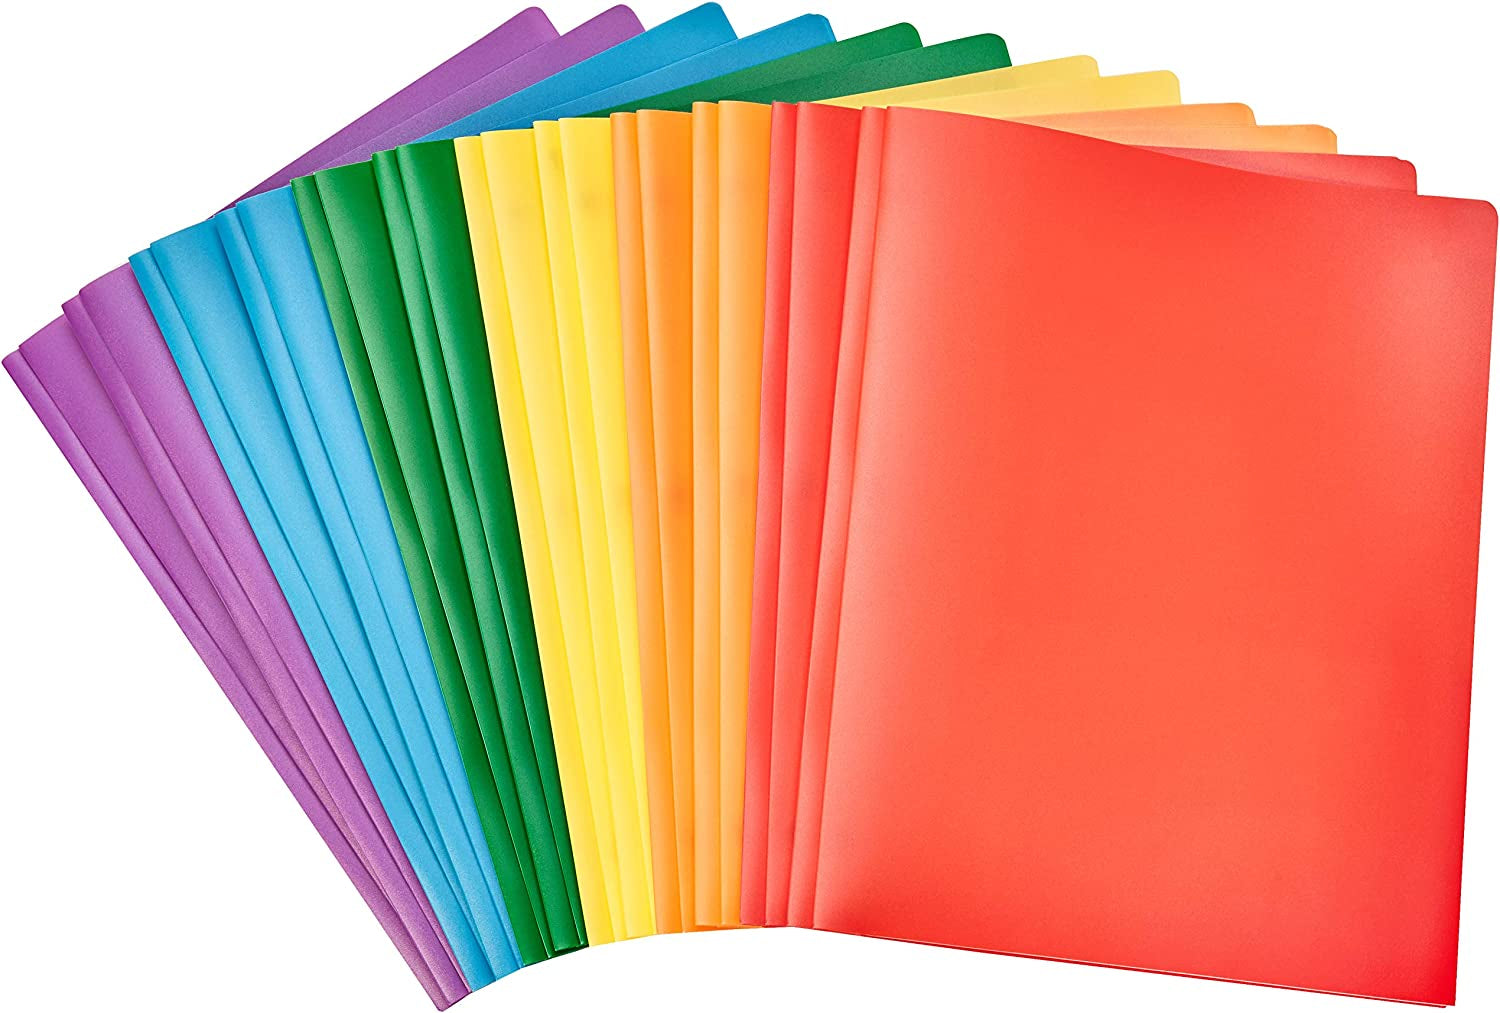 Amazon Basics Heavy Duty Plastic Folders with 2 Pockets for Letter Size Paper, Pack of 12, Assorted Color